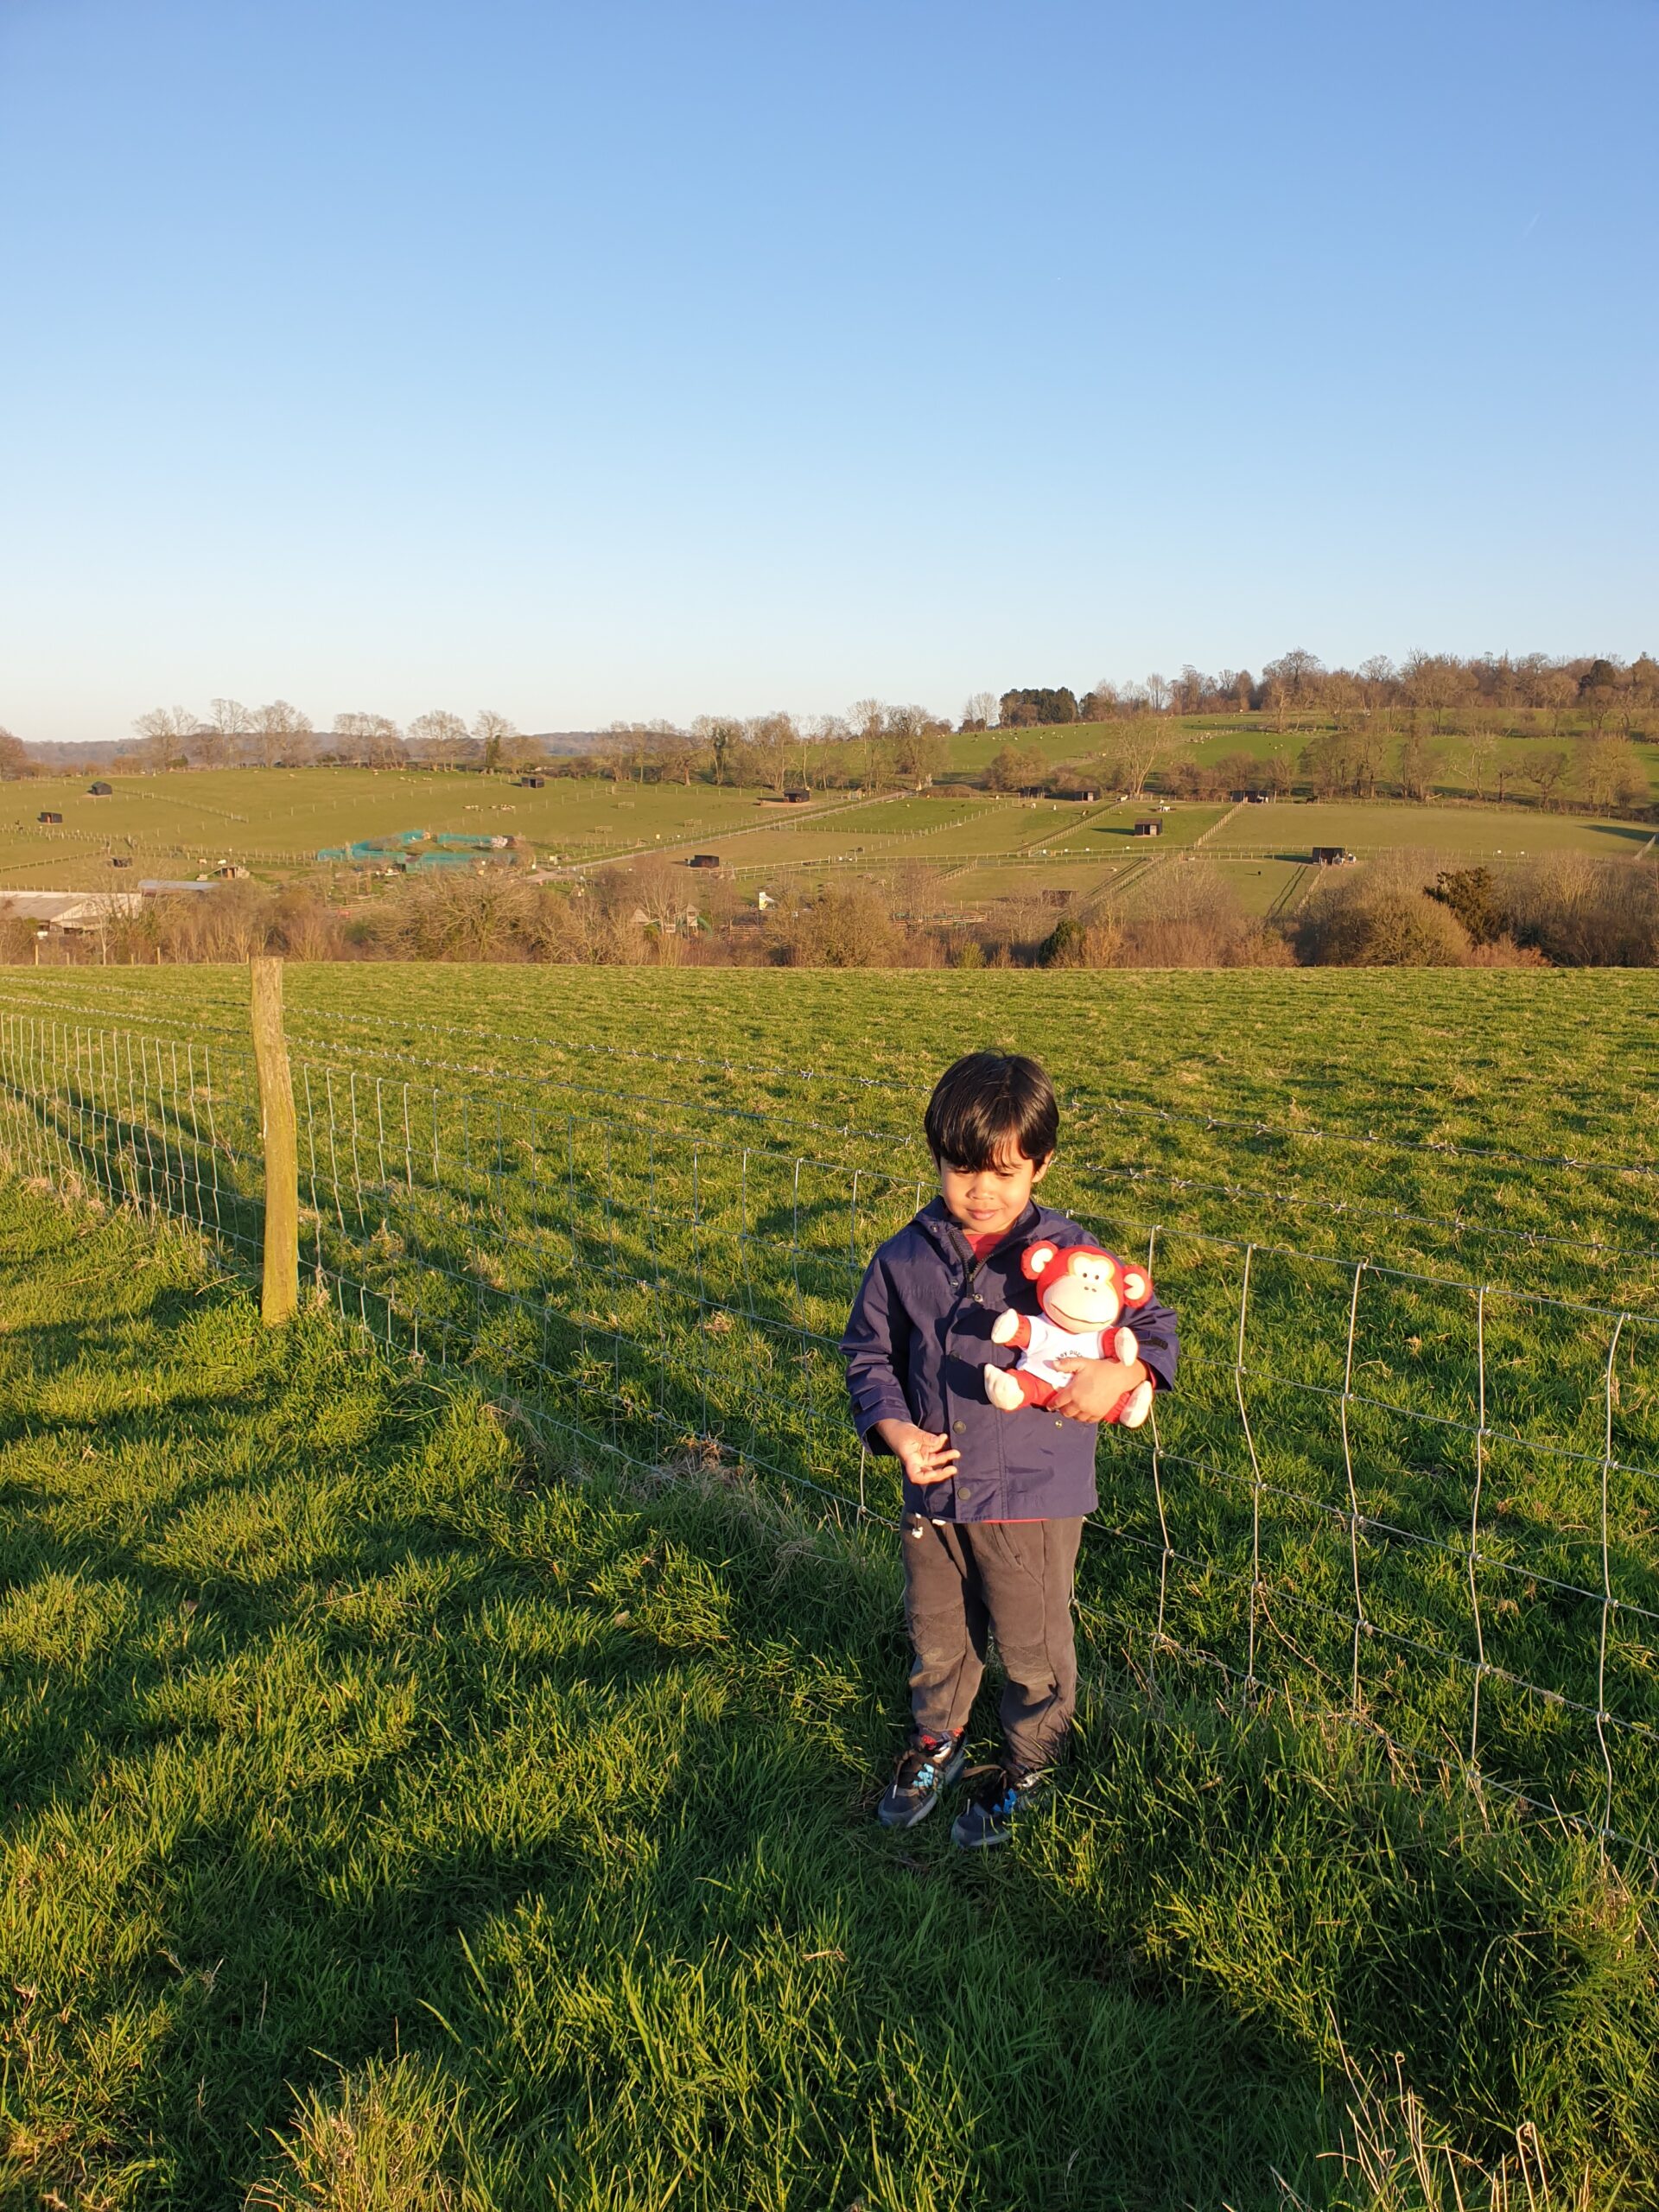 Enjoying the sunshine in the fields with his friend